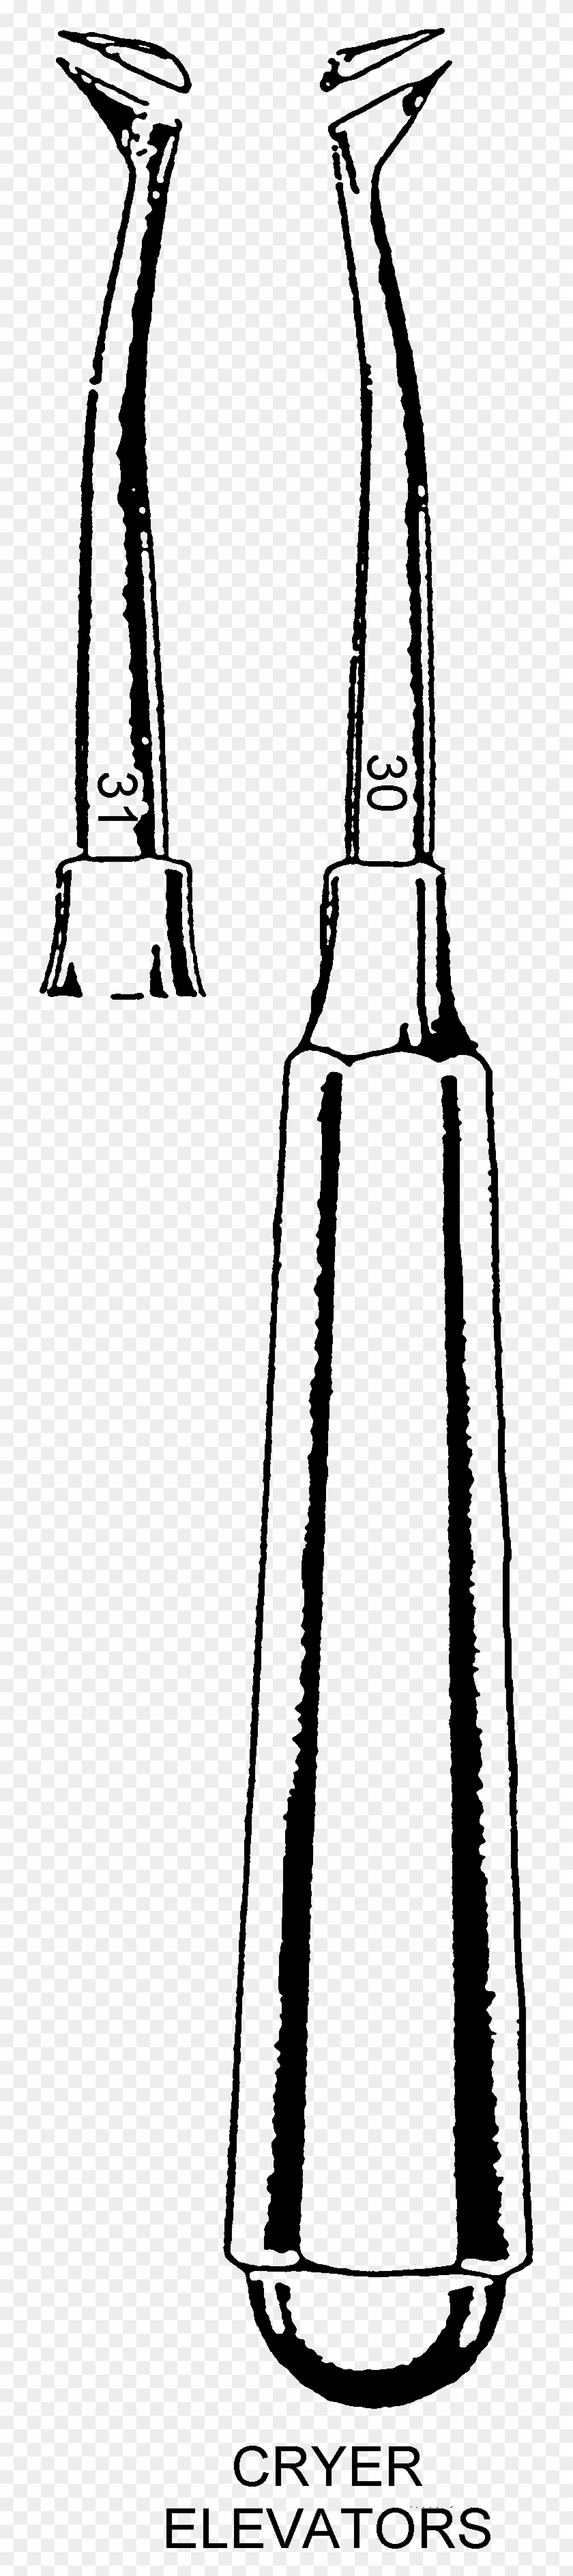 The Beaks Of The Forceps Are Designed To Firmly Grasp - Glass Bottle Clipart #2211945